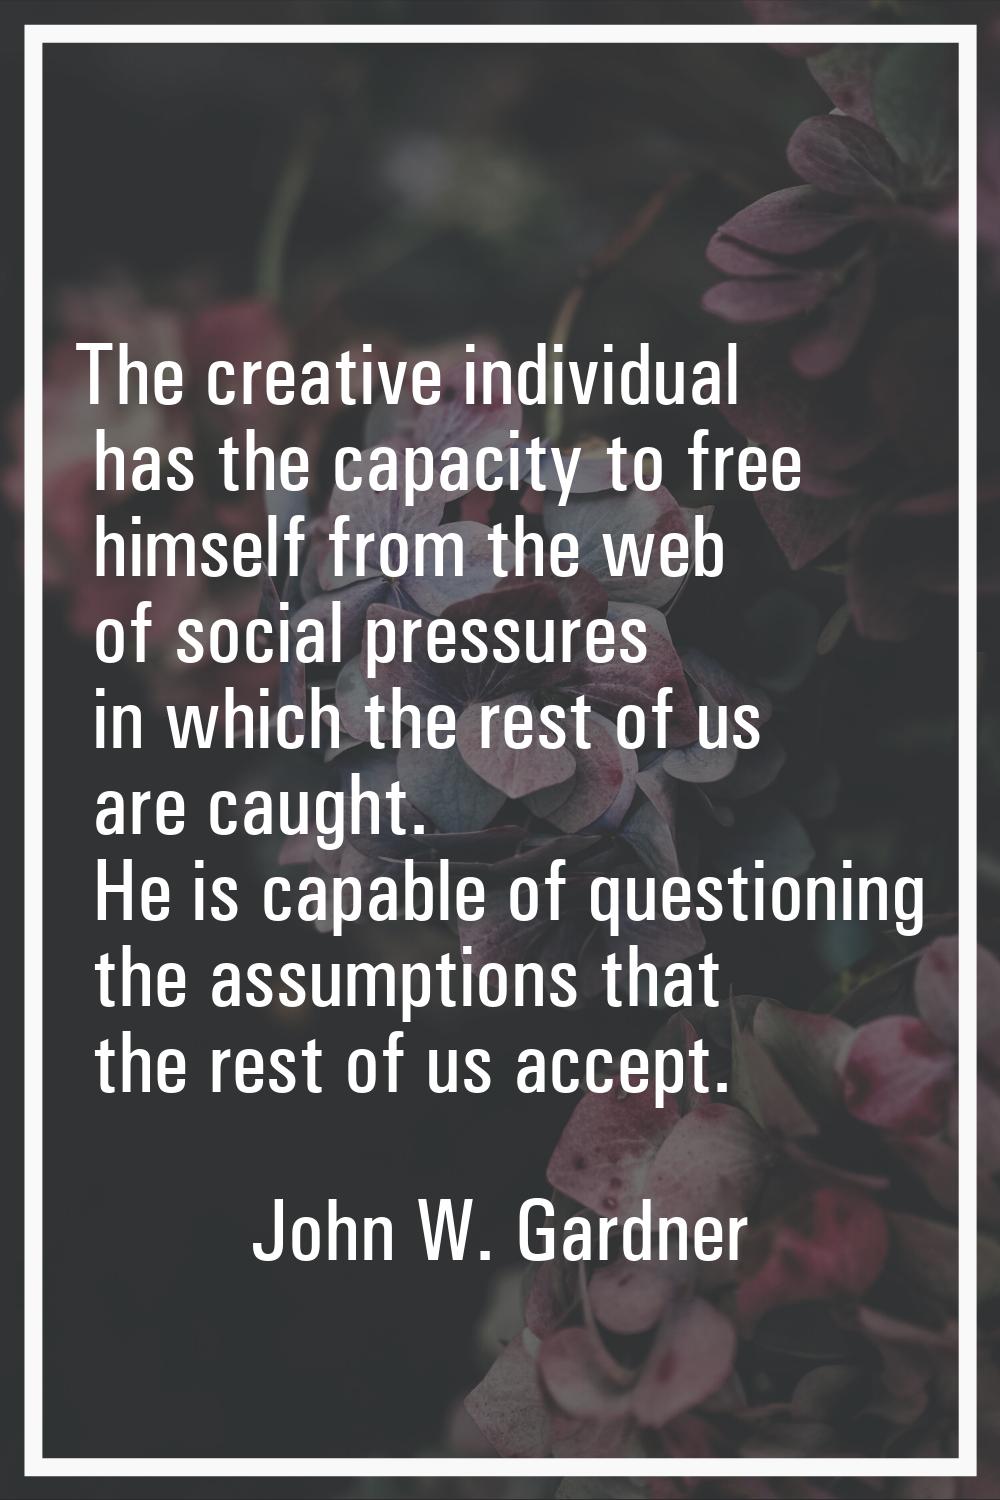 The creative individual has the capacity to free himself from the web of social pressures in which 